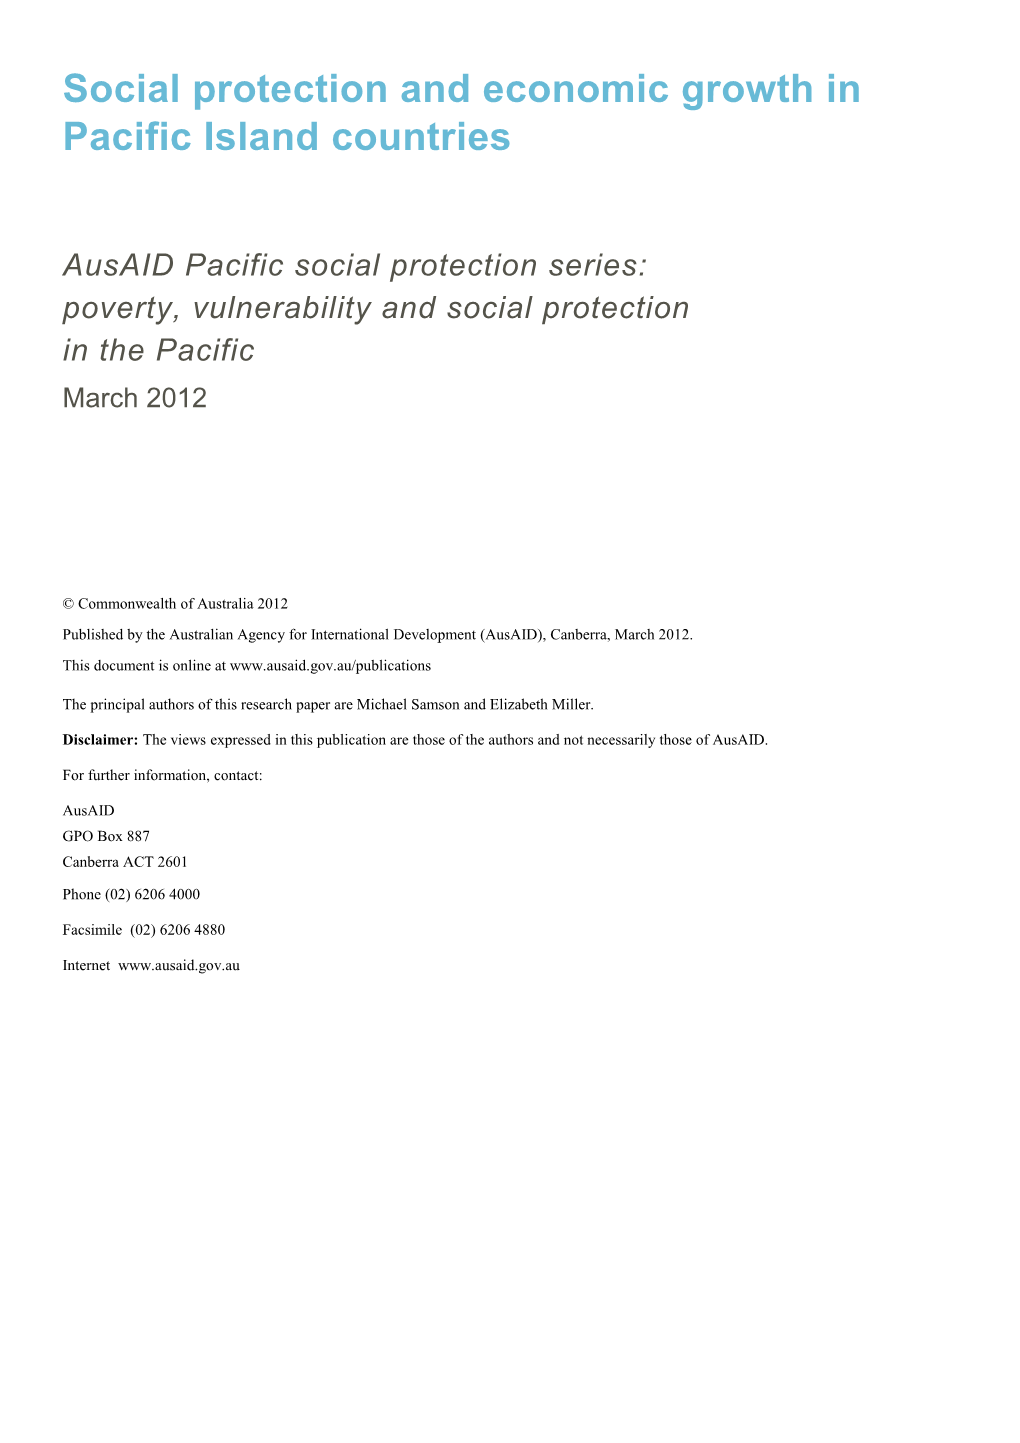 Social Protection and Economic Growth in Pacific Island Countries